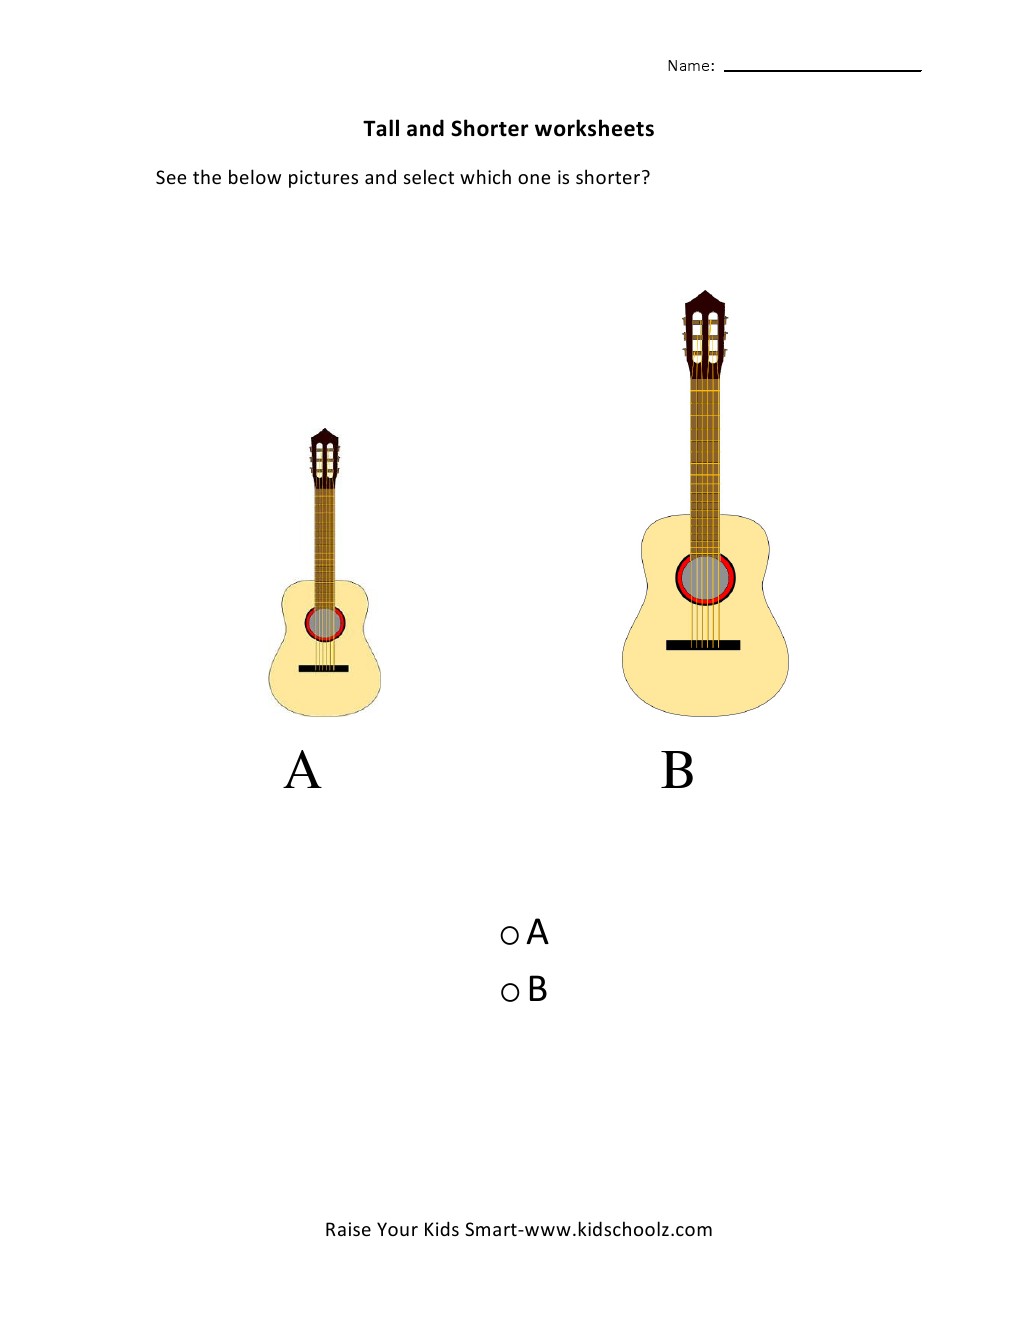 Parts Of The Guitar Worksheet The Best Worksheets Image Collection